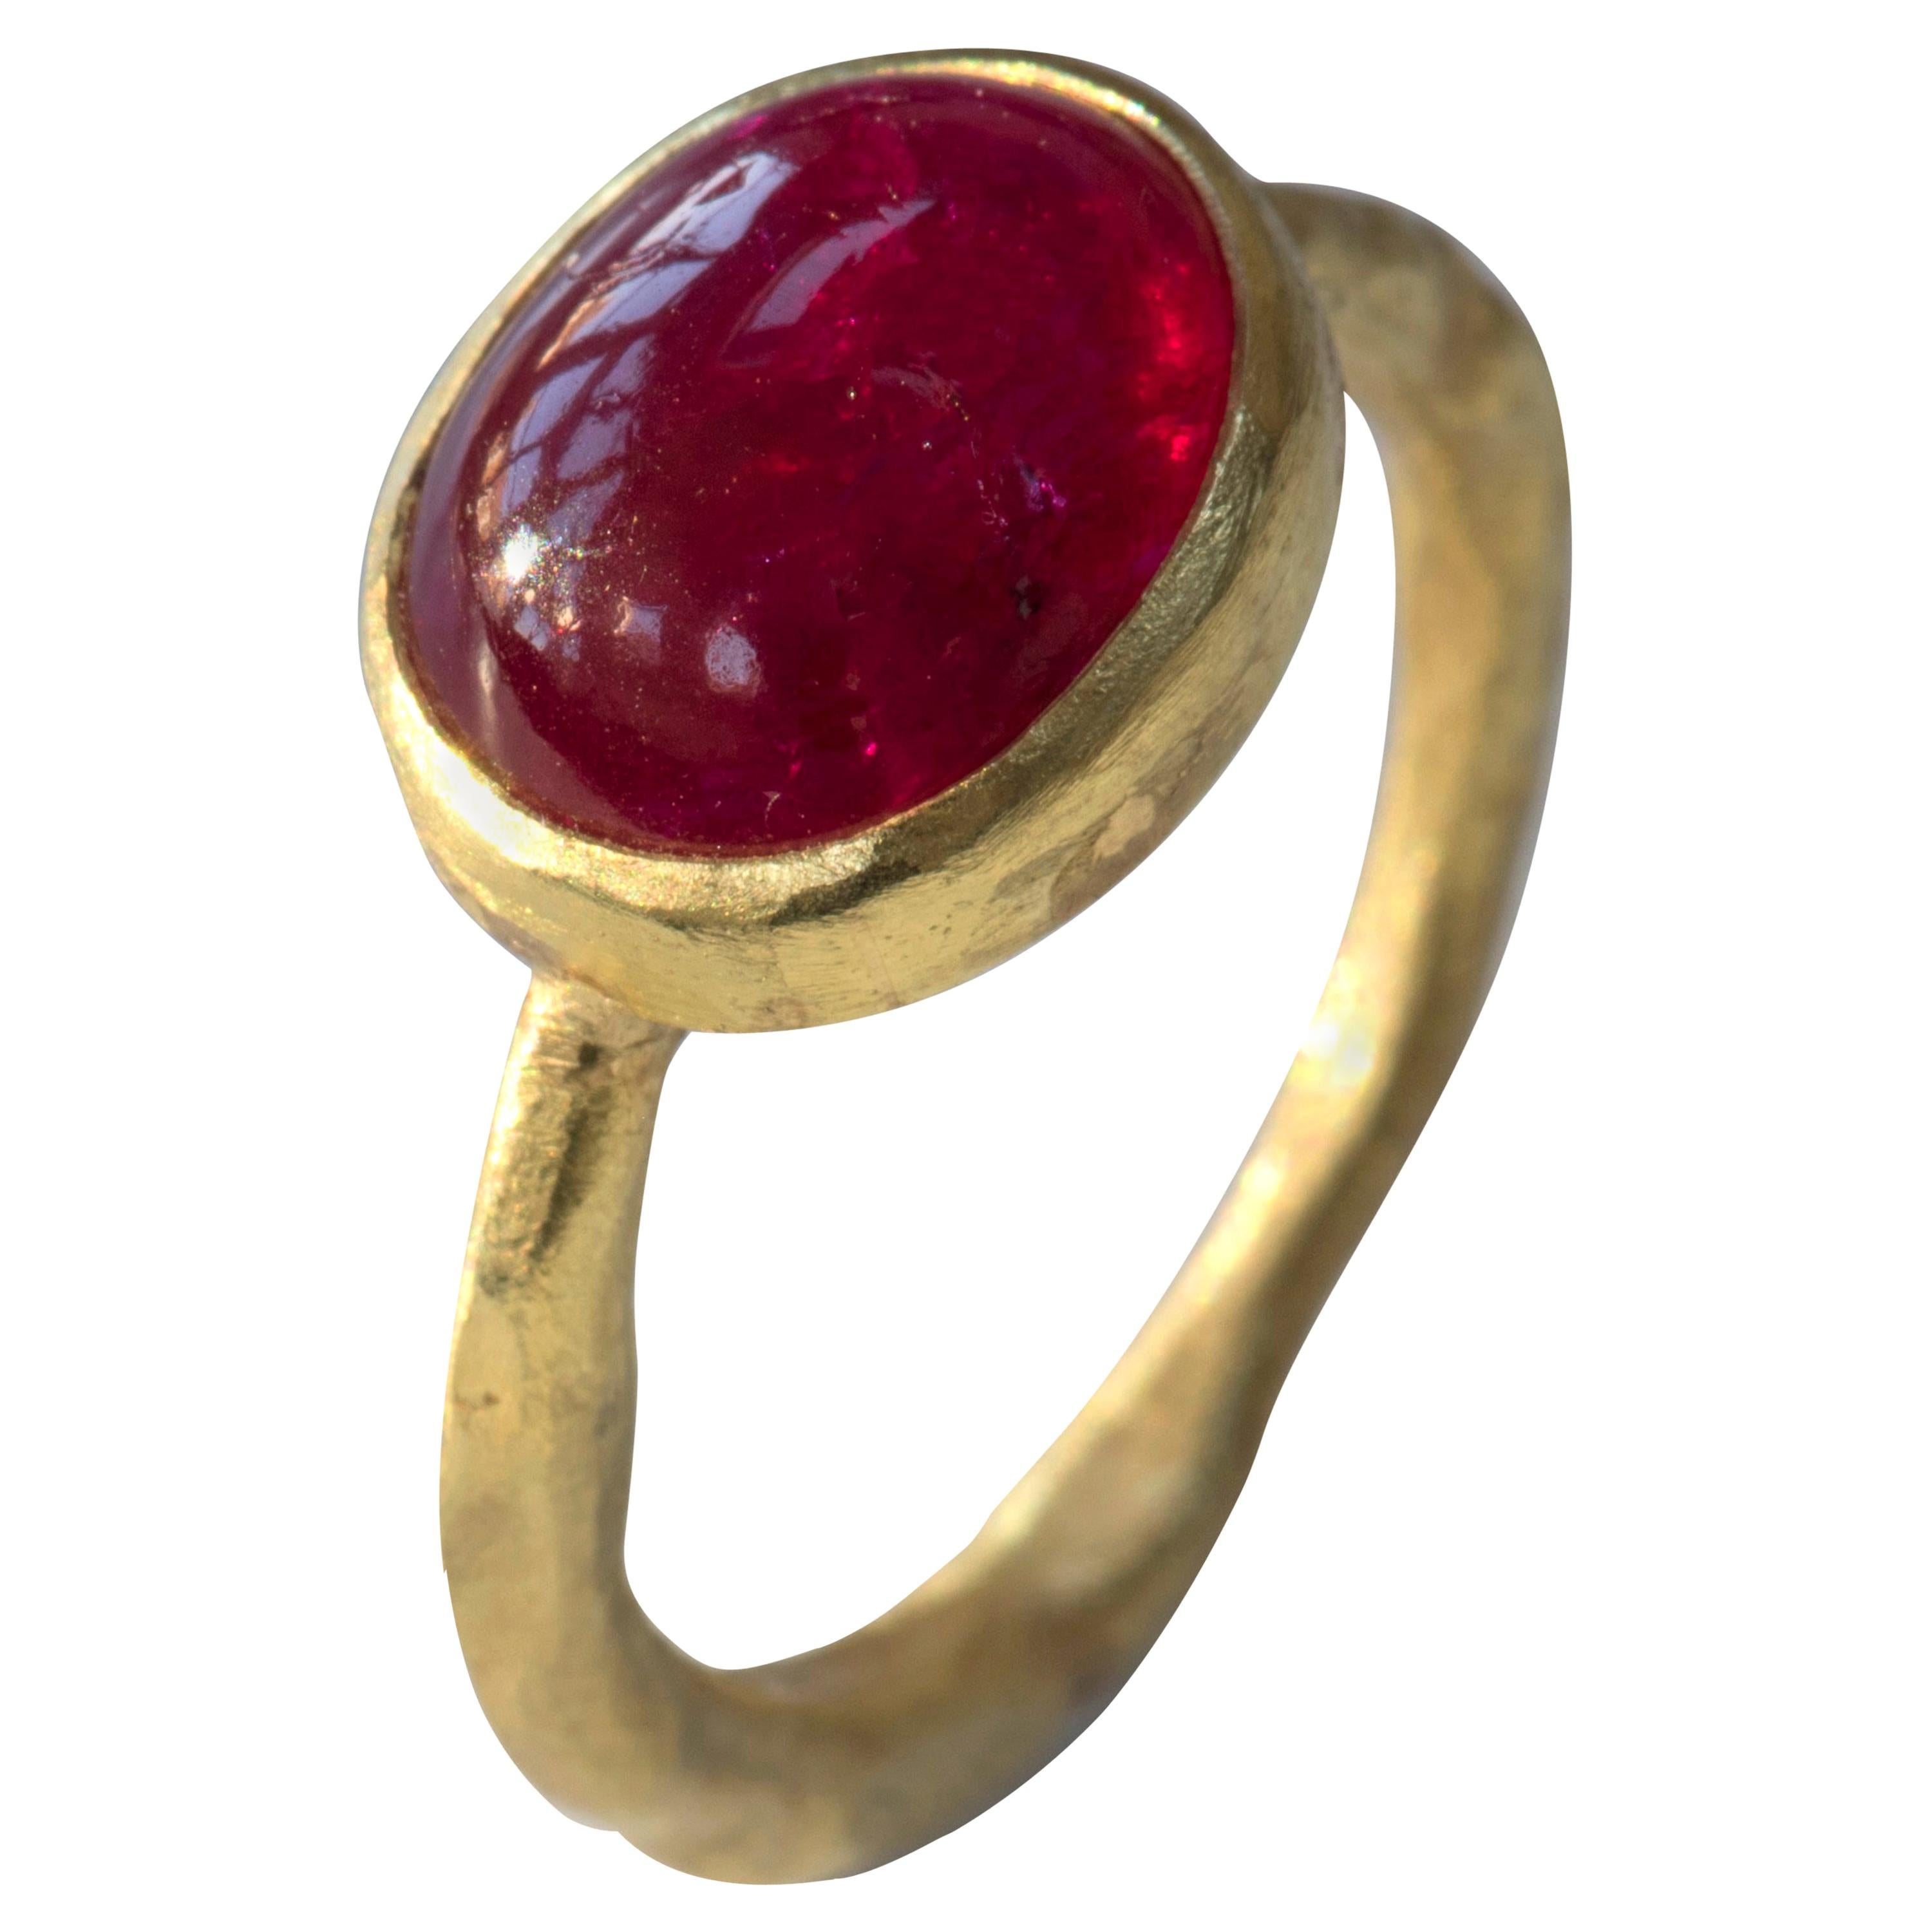 Cabouchon Ruby 18 Karat Gold Ring Handmade by Disa Allsopp For Sale